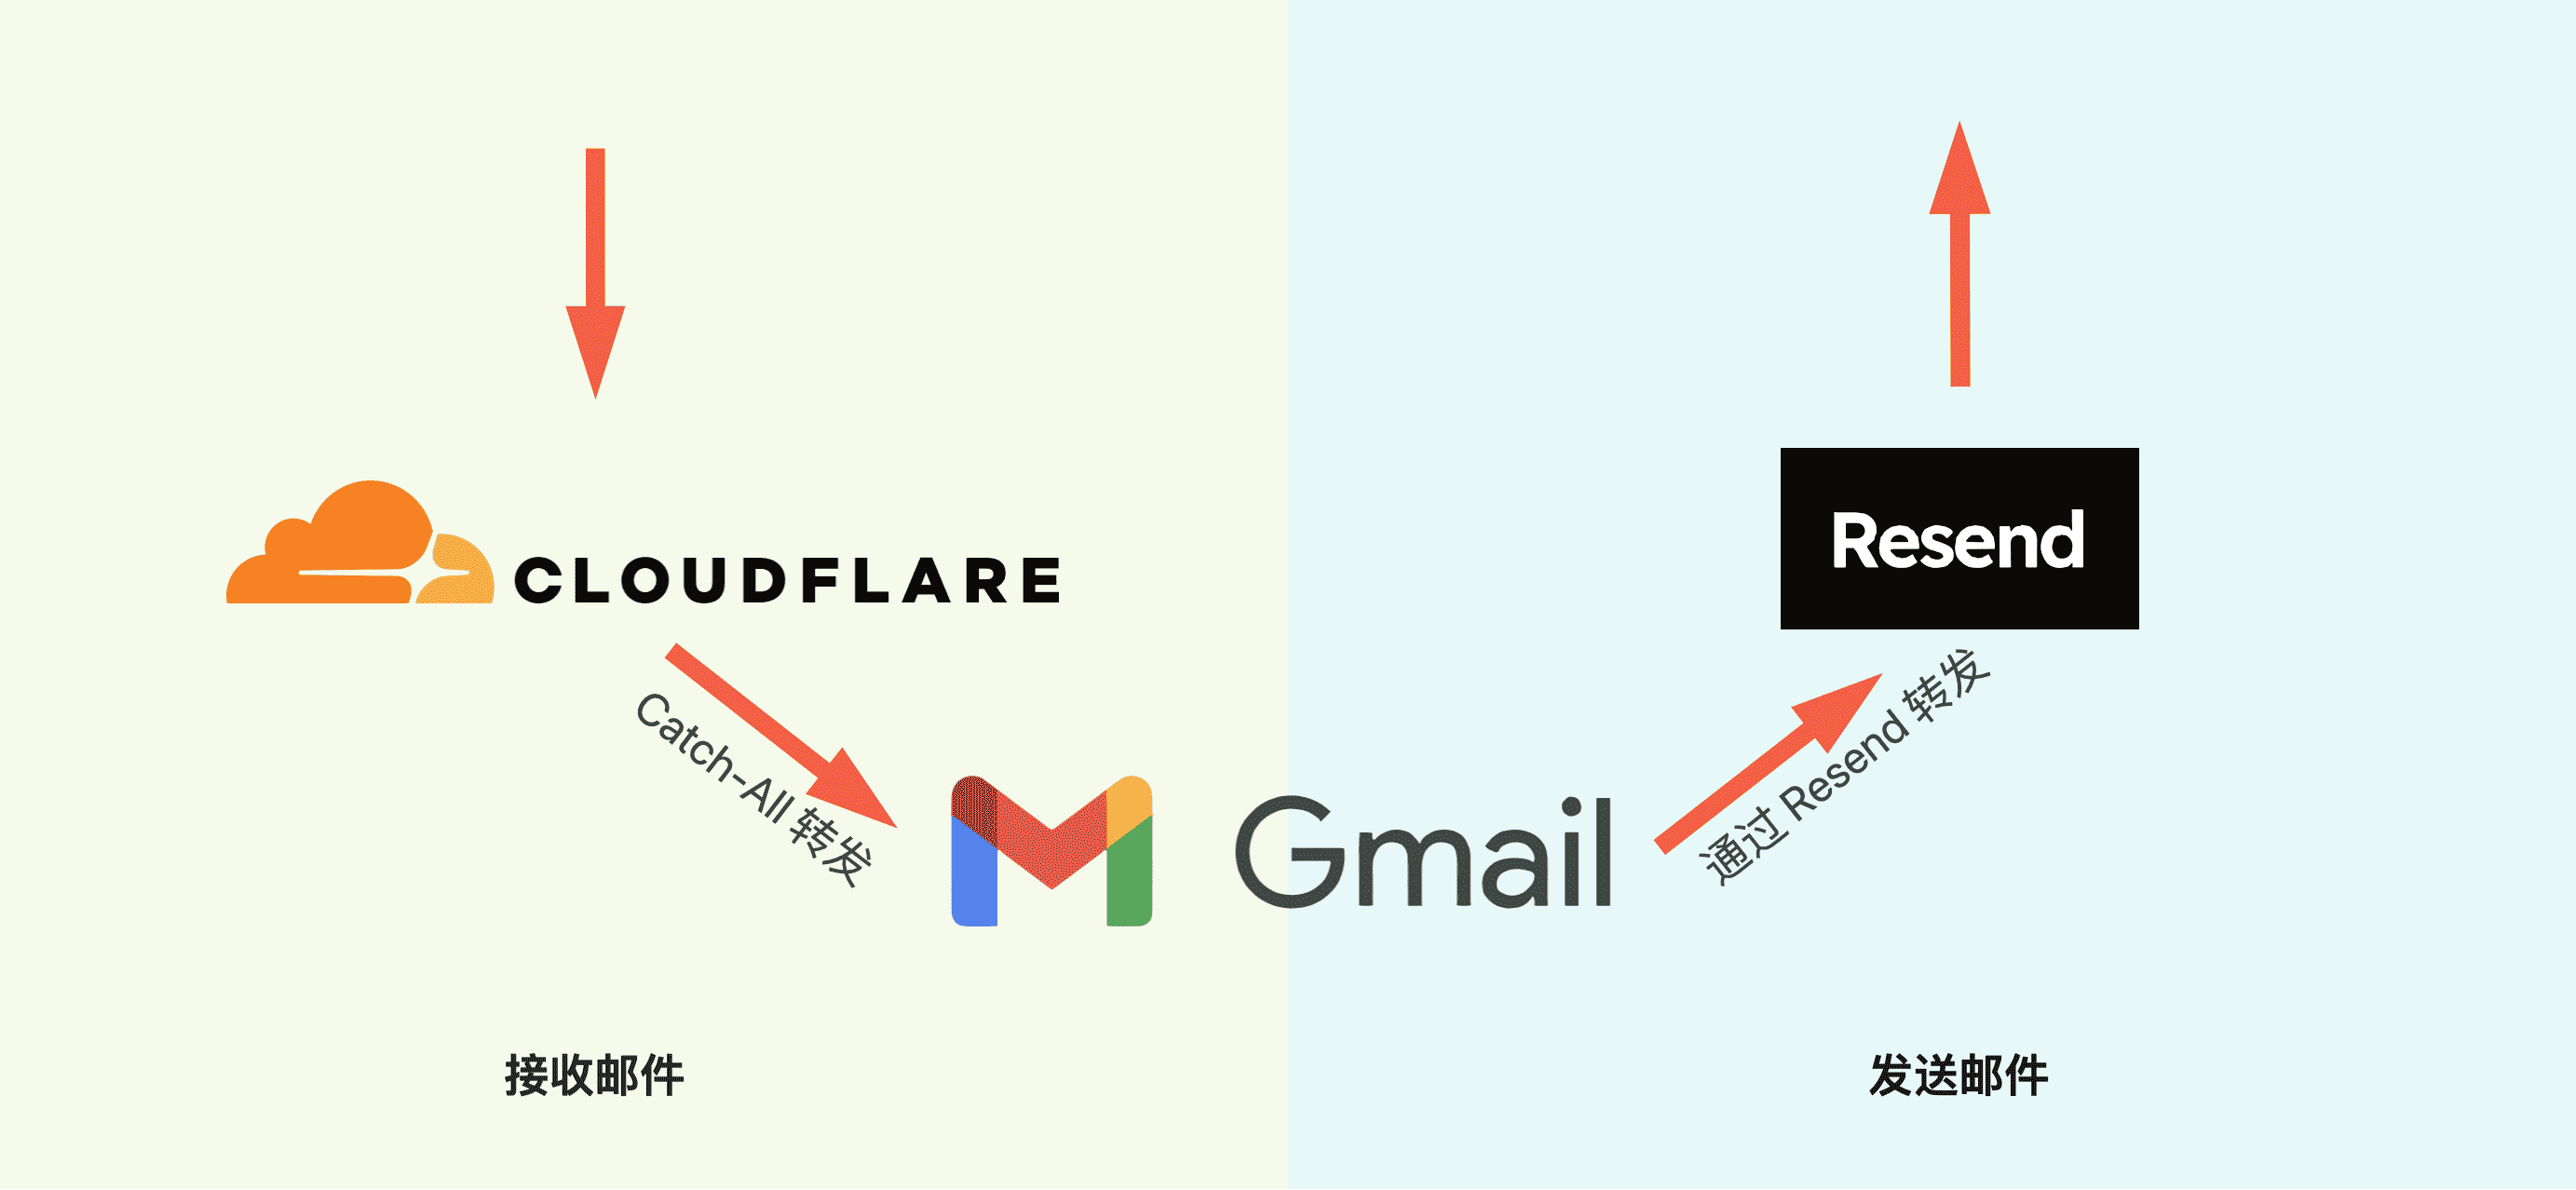 how to get free enterprise email using cloudflare-worker + gmail + resend